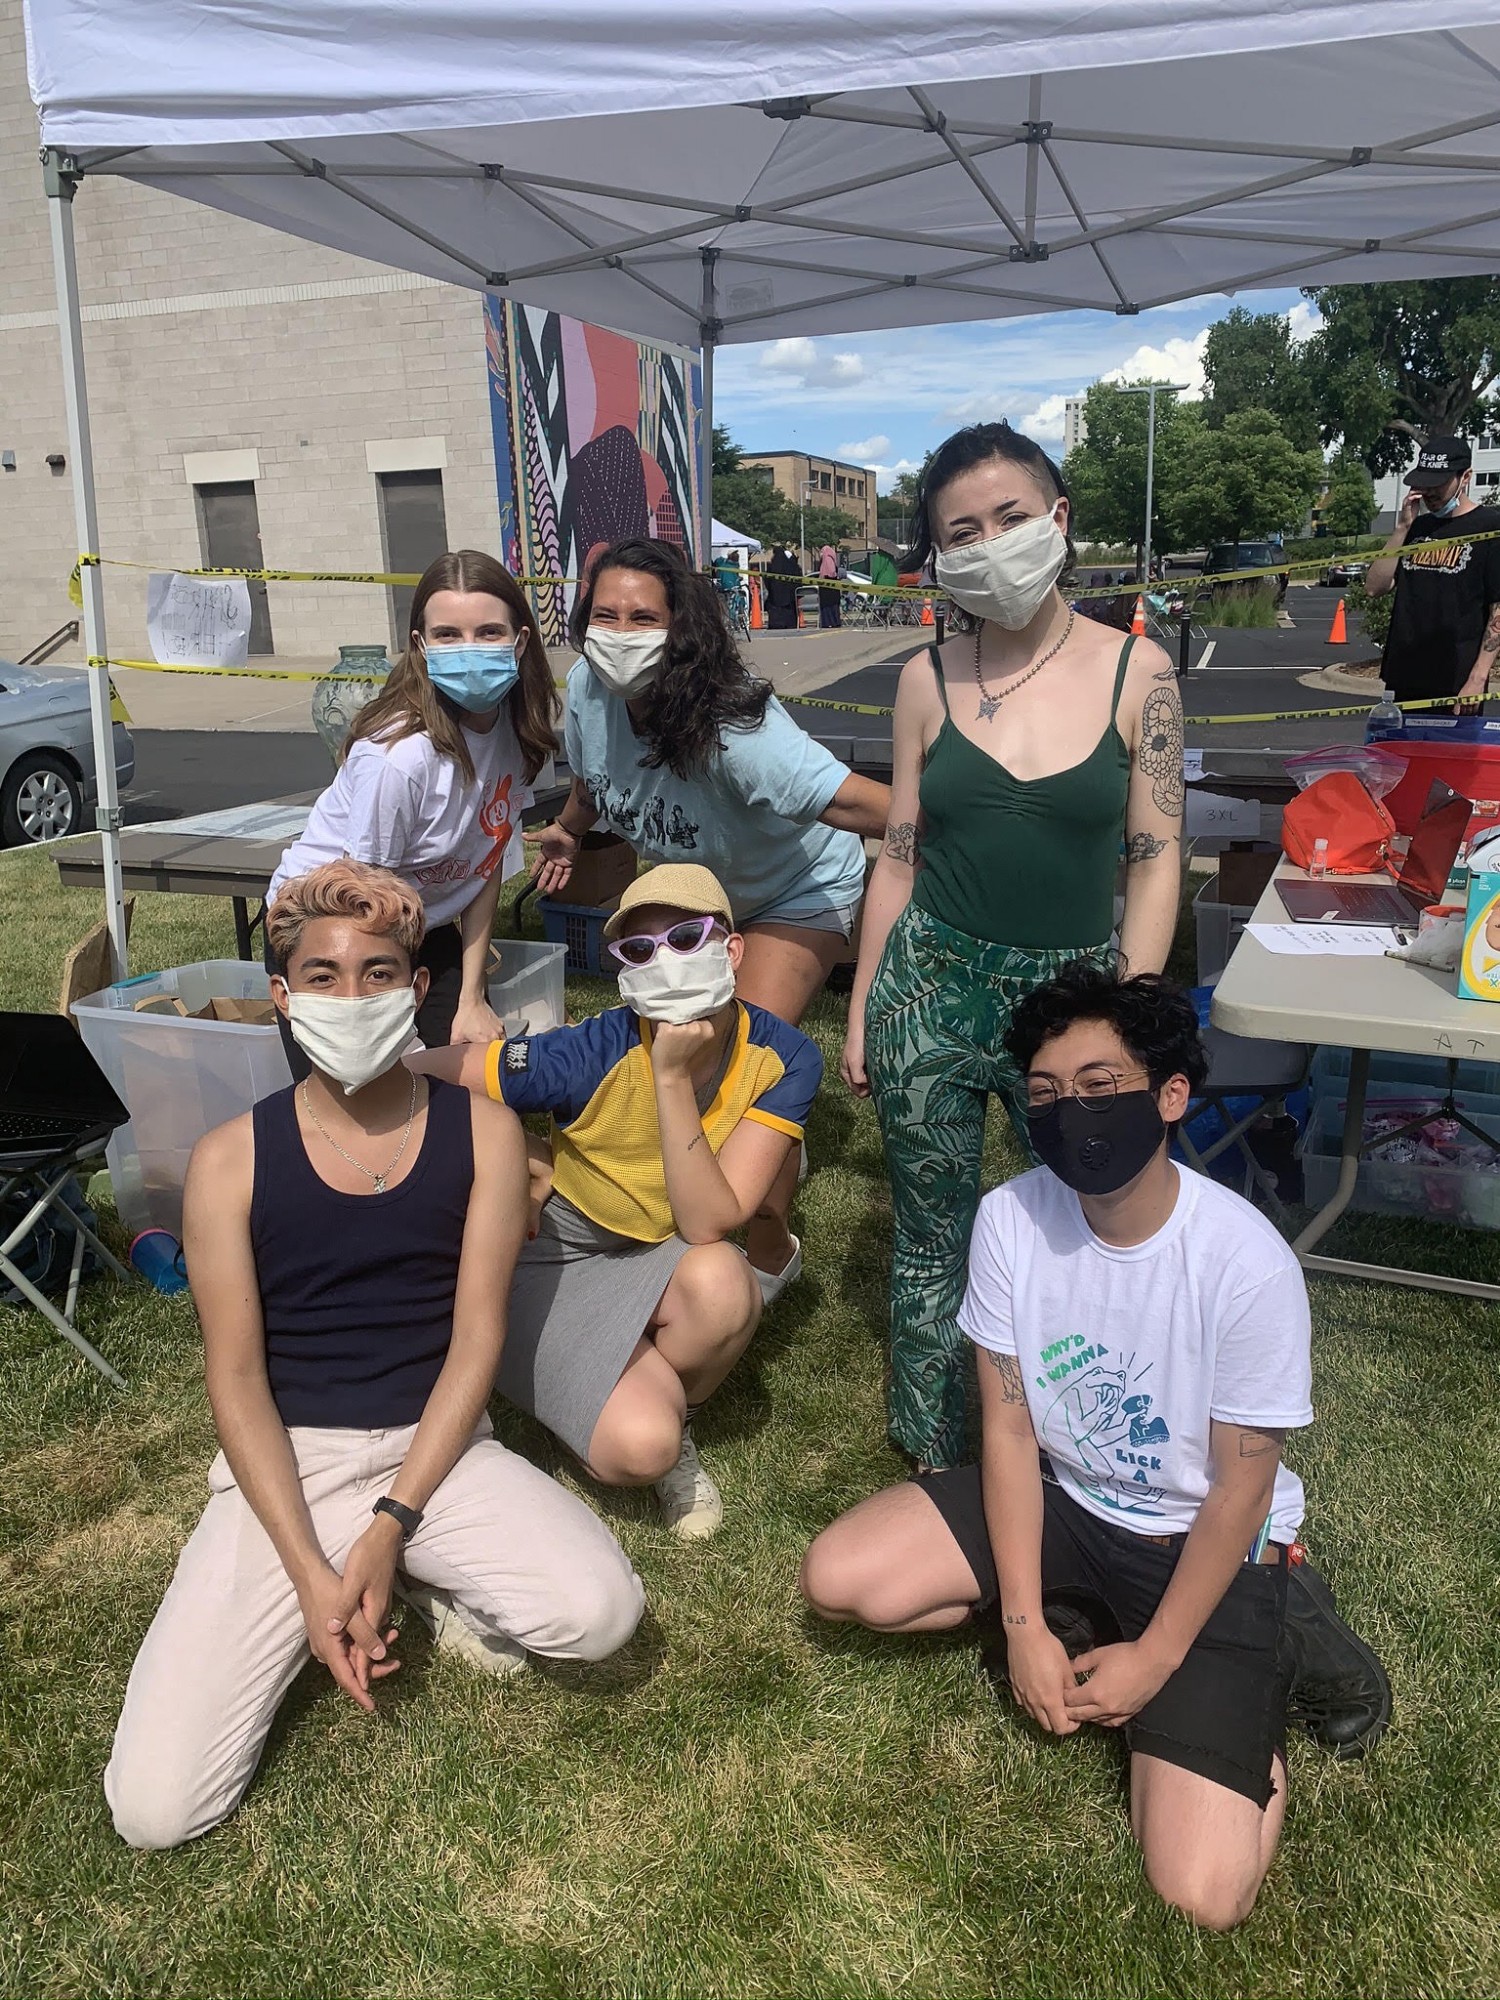 Ursula Arhart, Kristina Johnson, Cecily Bohman, Jaime Candia, Rebekah Nygard, and Nico Sardina,  from back left to front right, pose for a picture while working at the Peoples Library T-Shirt pop-up shop. (Photo courtesy of The People’s Library)